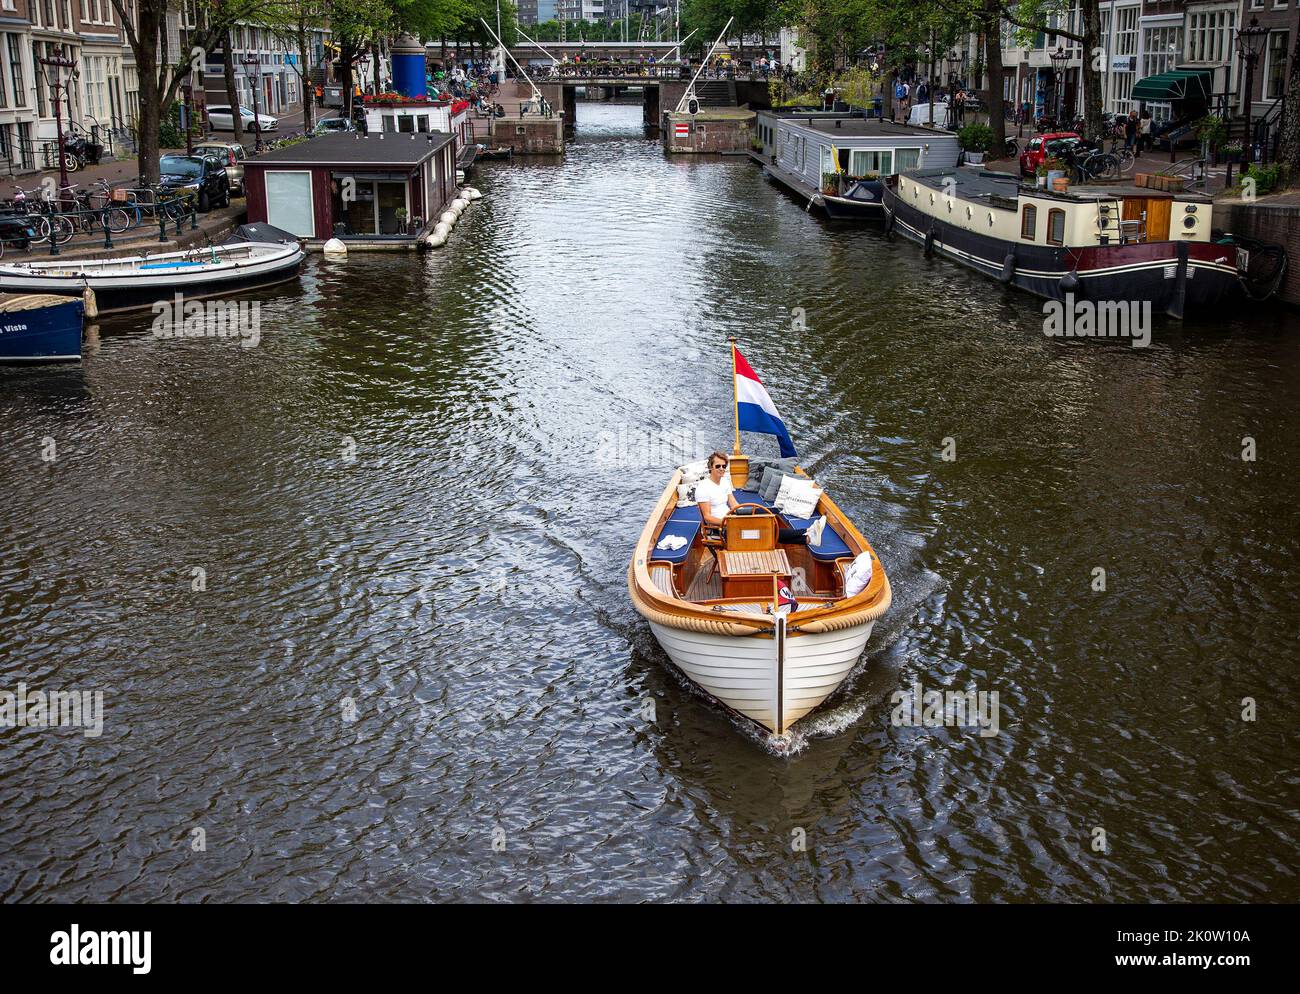 A boat traveling along an Amsterdam canal Stock Photo